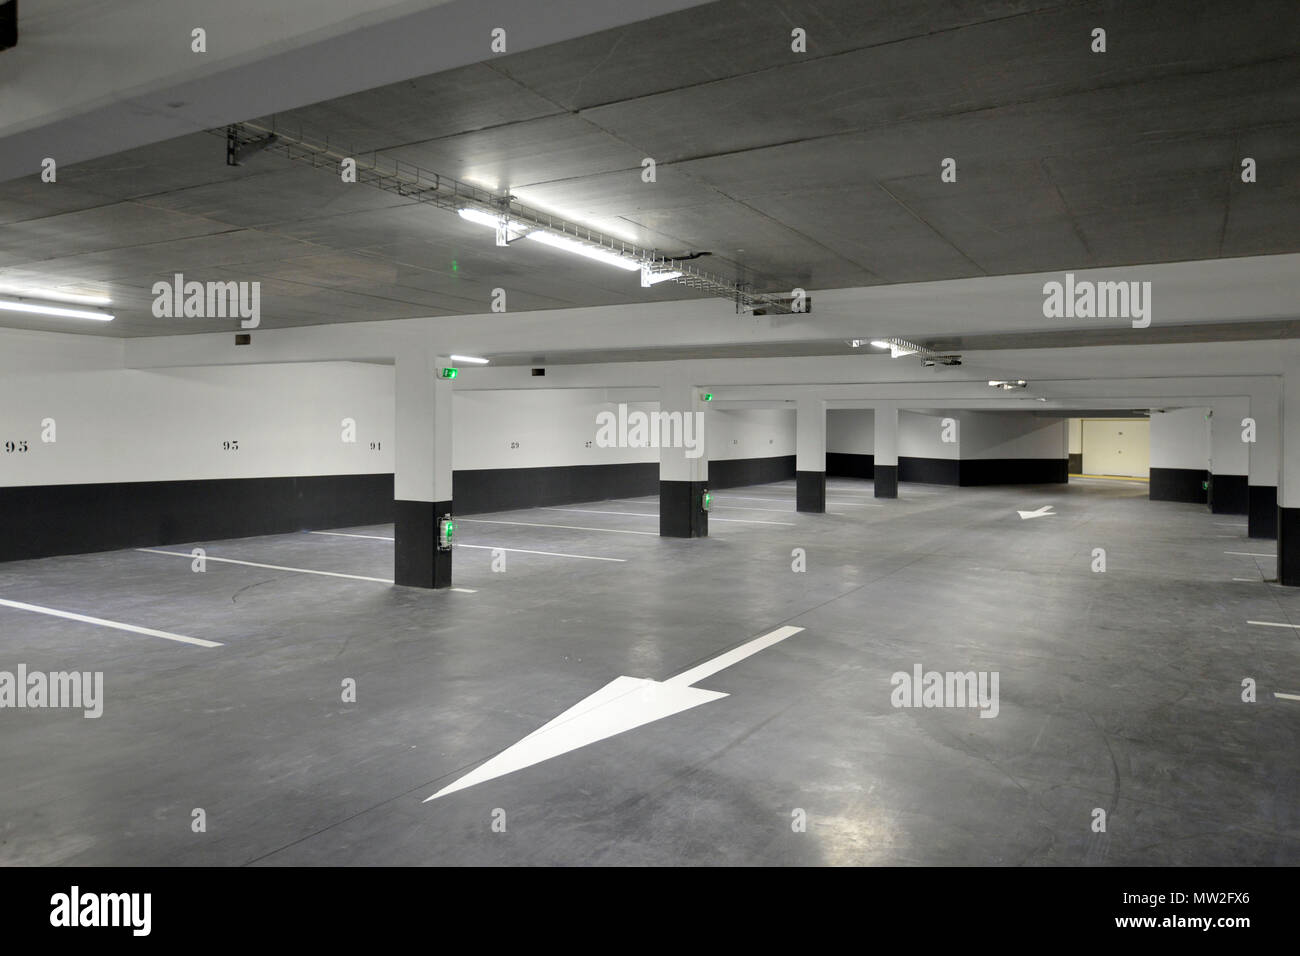 Underground parking lot of a private apartment block: parking place marked out by floor markings and arrows on the ground Stock Photo